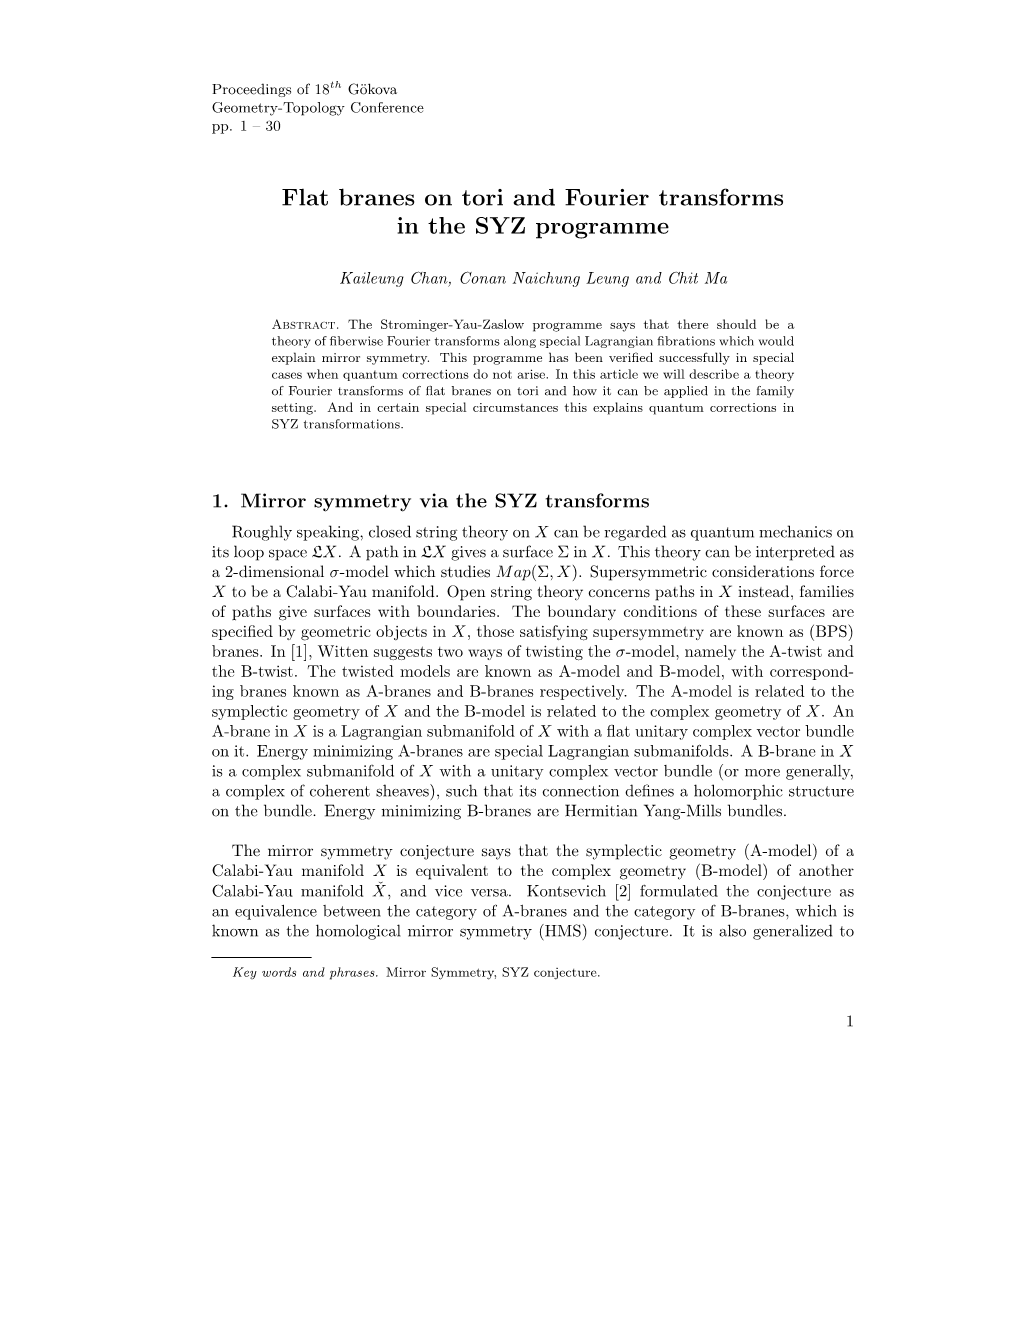 Flat Branes on Tori and Fourier Transforms in the SYZ Programme